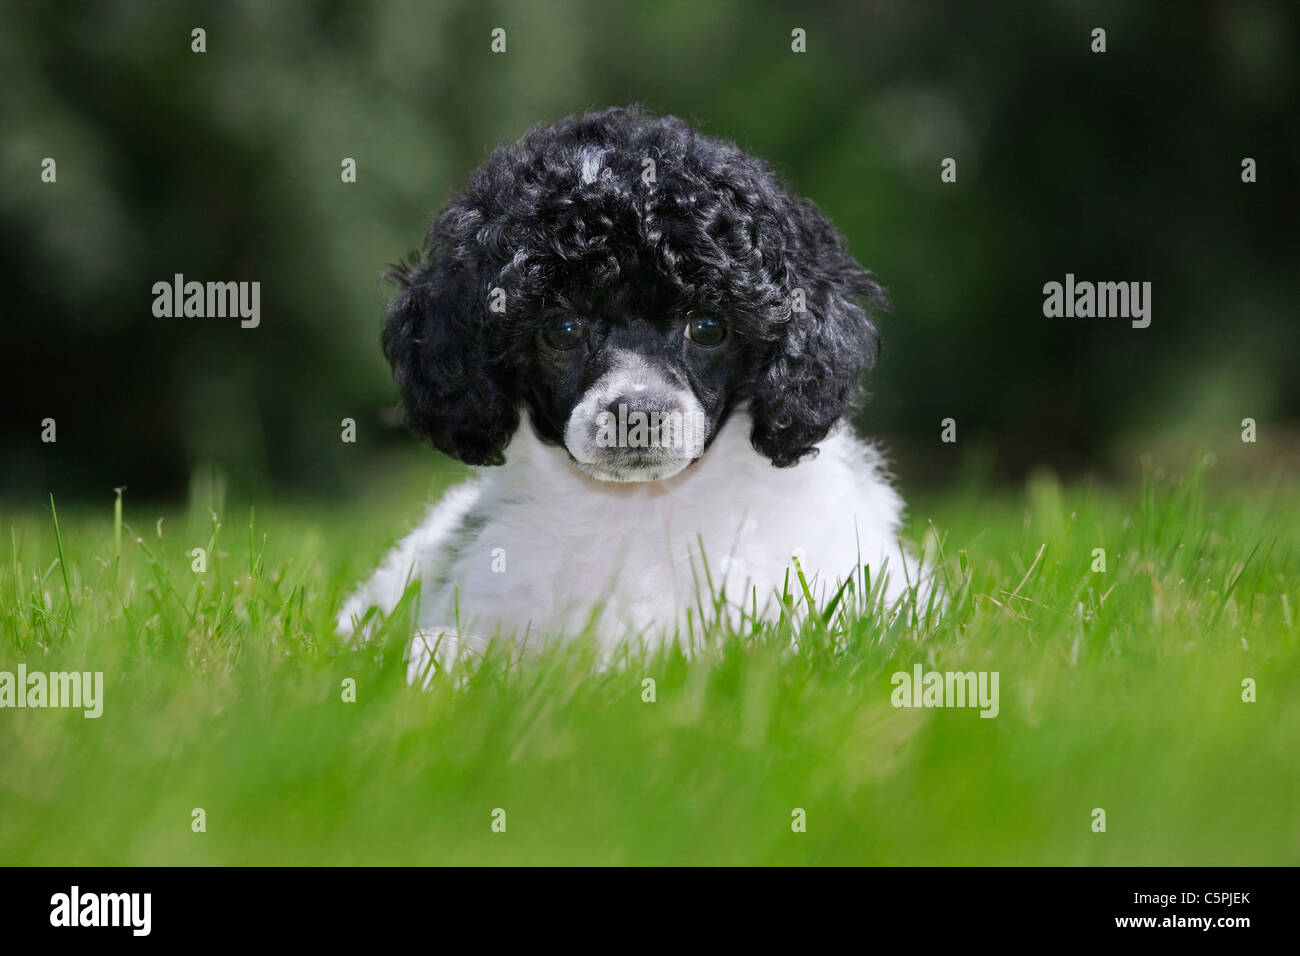 Black and white Miniature / Dwarf / Nain poodle (Canis lupus familiaris) in garden Stock Photo